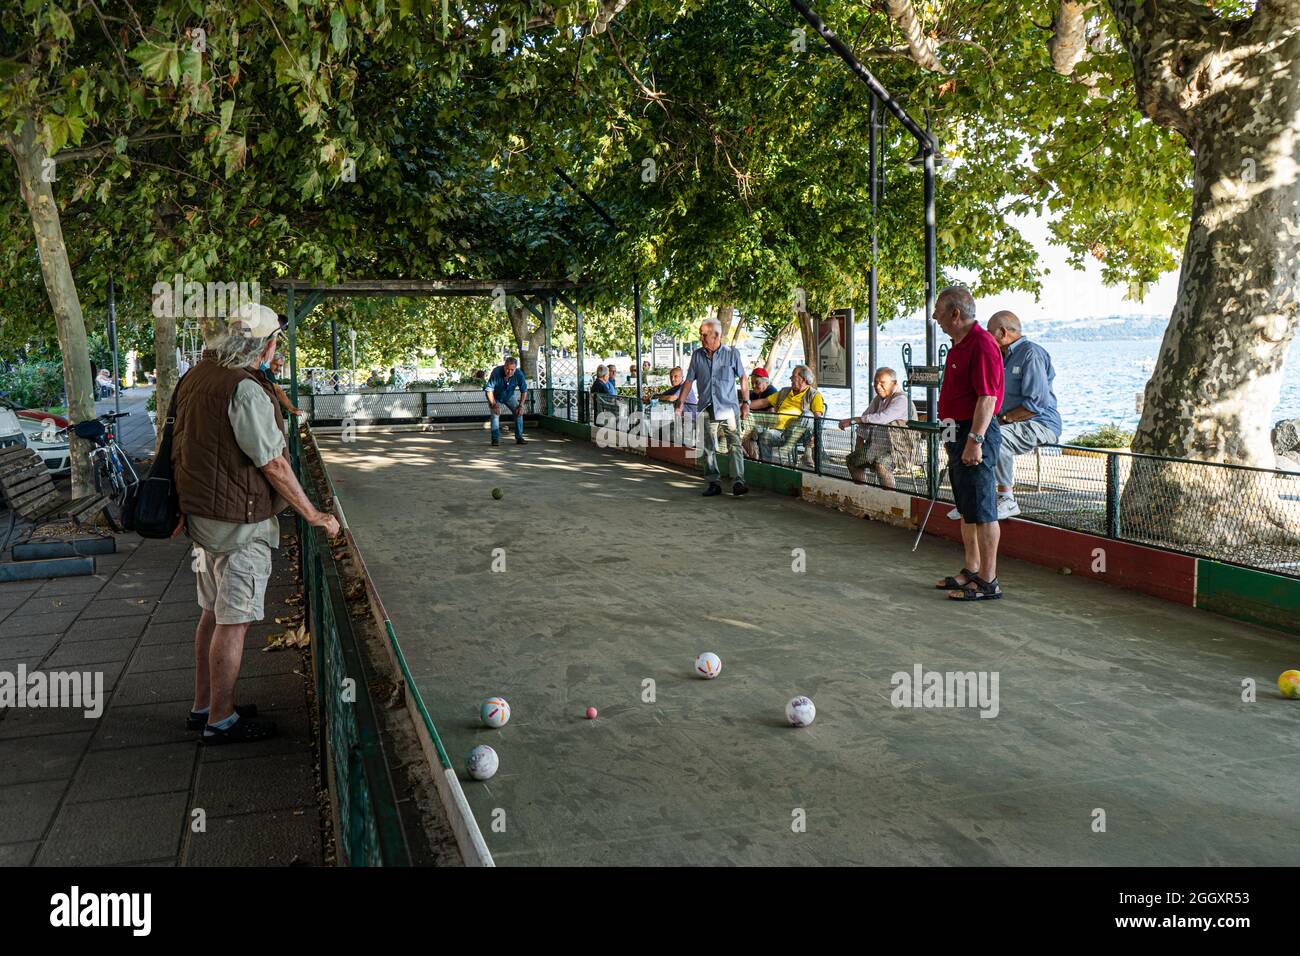 Bracciano, Italy. 03rd Sep, 2021. Italian men  enjoy playing Bocce on a hot summer day under a shaded area. Bocce is a ball sport which is similar to  British bowls and French pétanque and is played around Europe and by Italian immigrants in Australia and North America.  Credit: amer ghazzal/Alamy Live News Credit: amer ghazzal/Alamy Live News Stock Photo